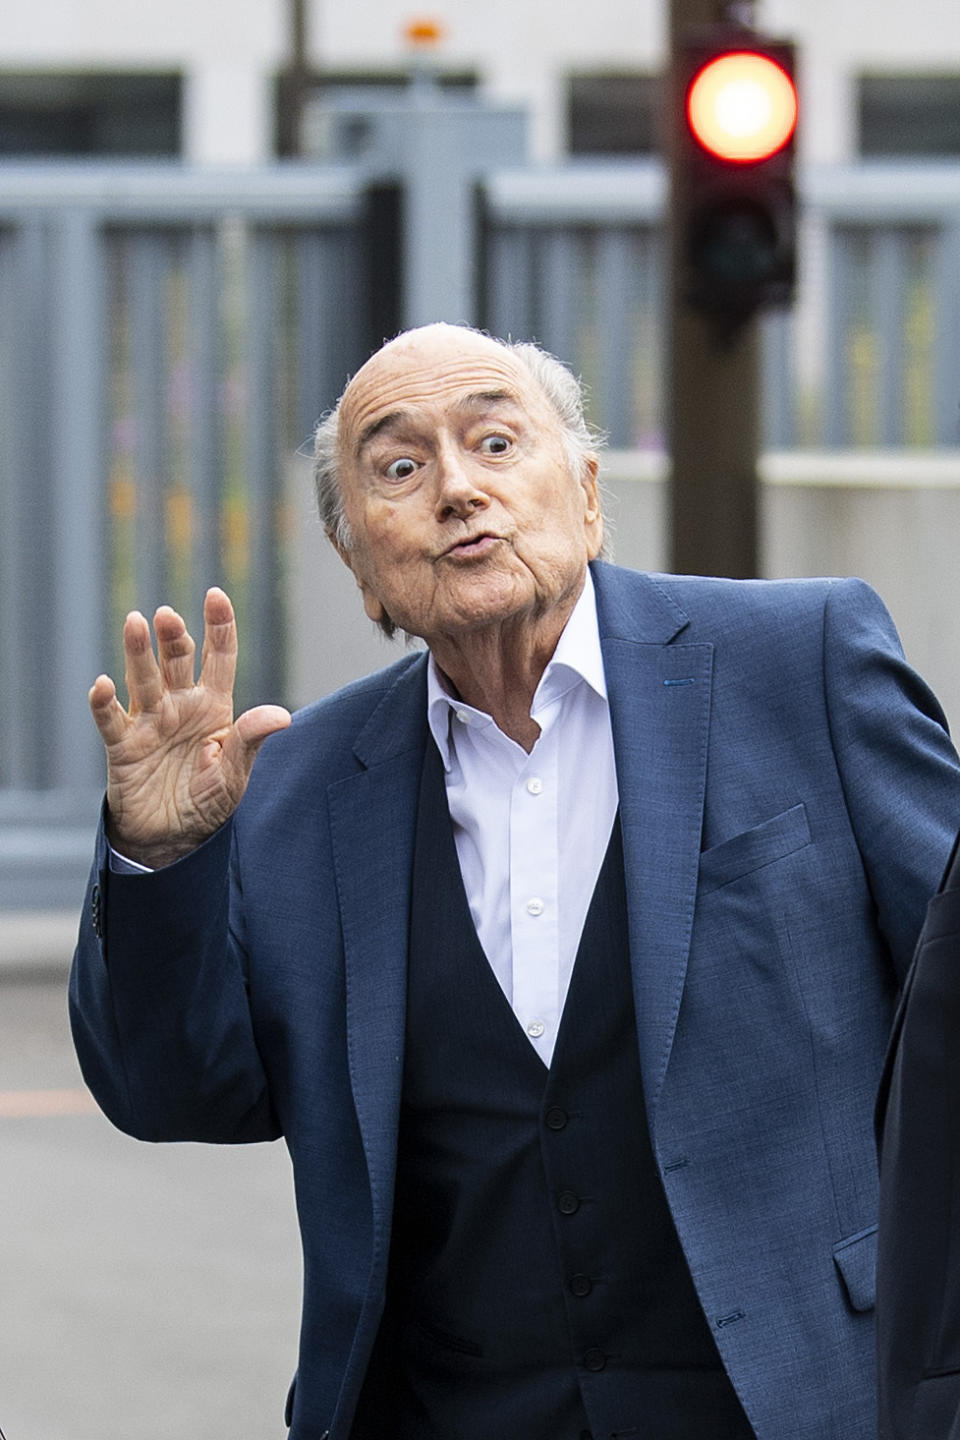 Former FIFA President Sepp Blatter appears in front of the building of the Office of the Attorney General of Switzerland, on Tuesday, Sept.1, 2020, in Bern, Switzerland. Sepp Blatter and former UEFA president Michel Platini each face interrogation from the Swiss public prosecutor as part of the proceedings opened in 2015 over a payment of 2 million Swiss francs. (Peter Schneider/Keystone via AP)